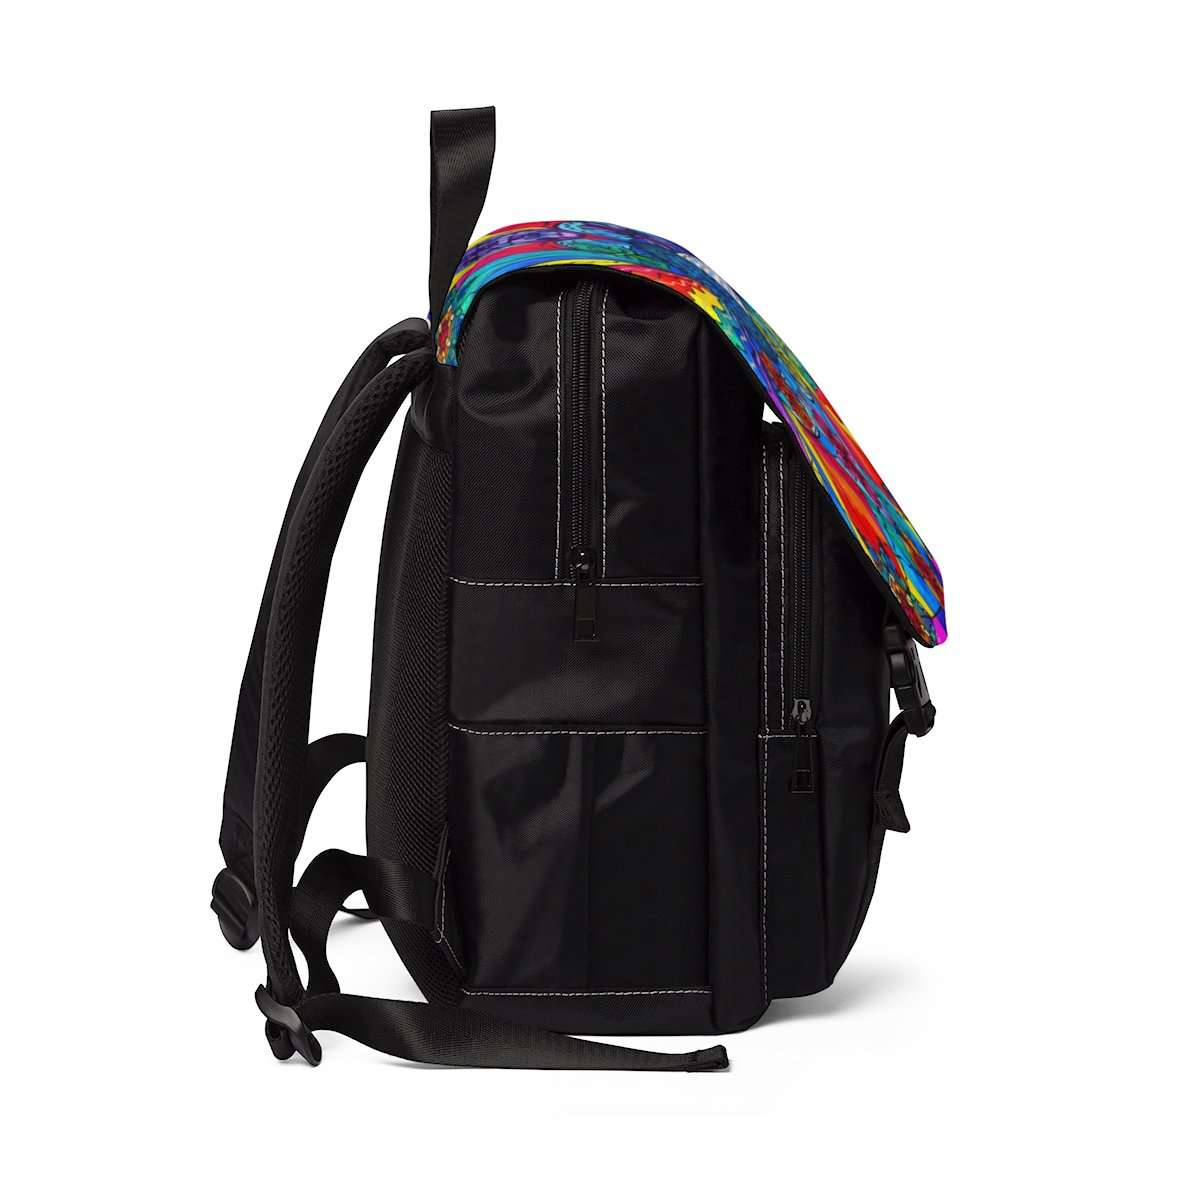 shop-authentic-speak-from-the-heart-unisex-casual-shoulder-backpack-supply_1.jpg